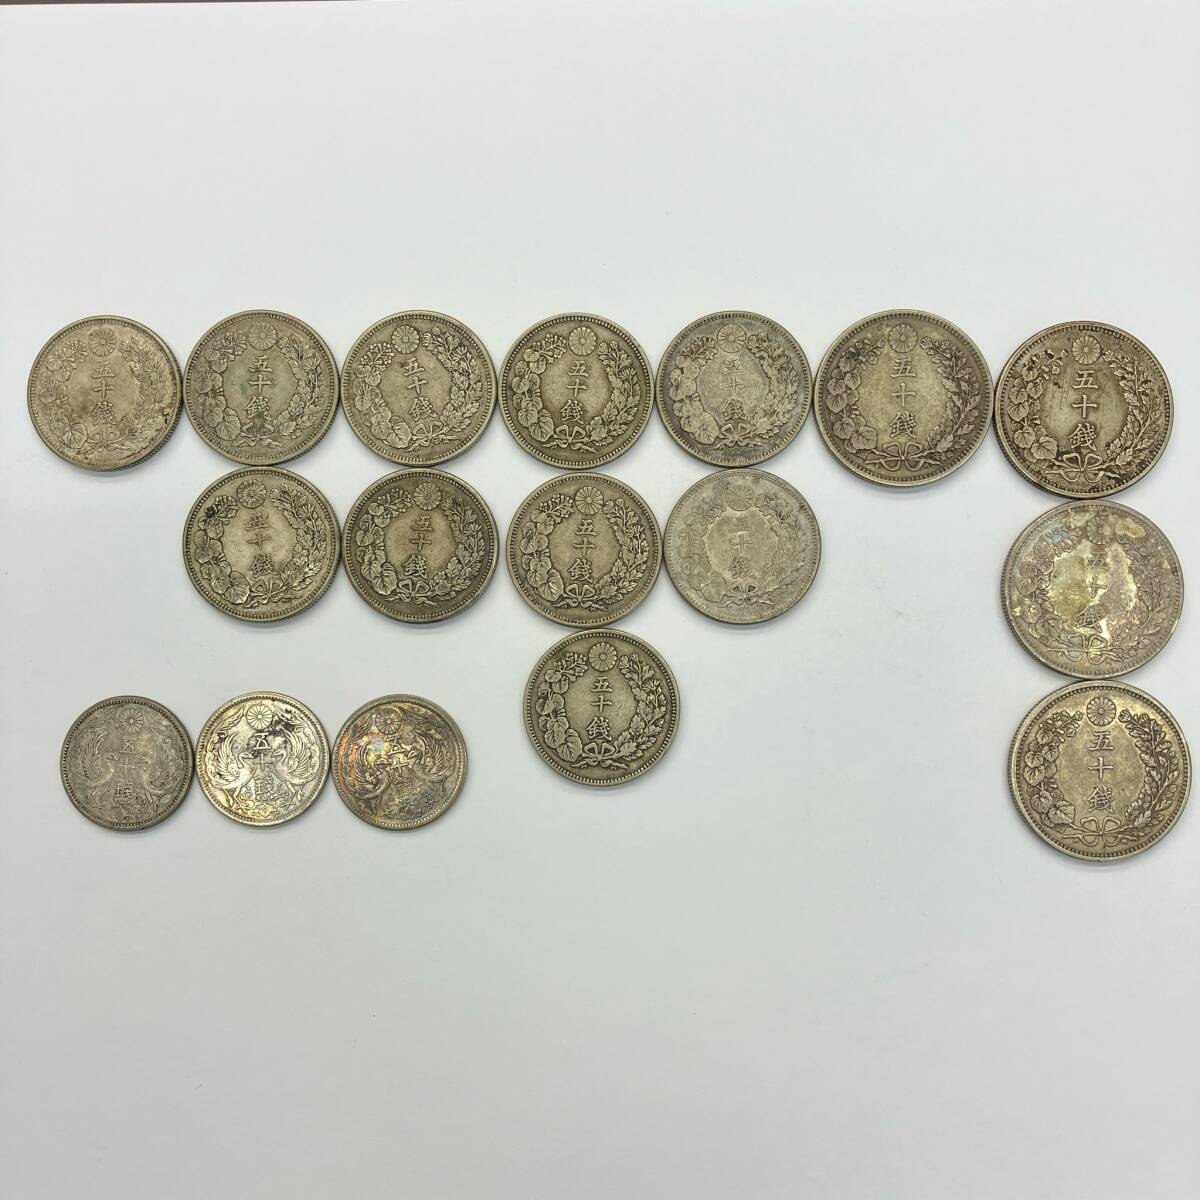 #2357~ Japan old coin dragon 50 sen silver coin Meiji 31 year 32 year asahi day 50 sen silver coin Meiji 40 year 41 year 43 year asahi day medium sized 50 sen silver coin Taisho 2 year 5 year phoenix 50 sen silver coin Taisho 11 year 12 year 13 year not yet judgment 